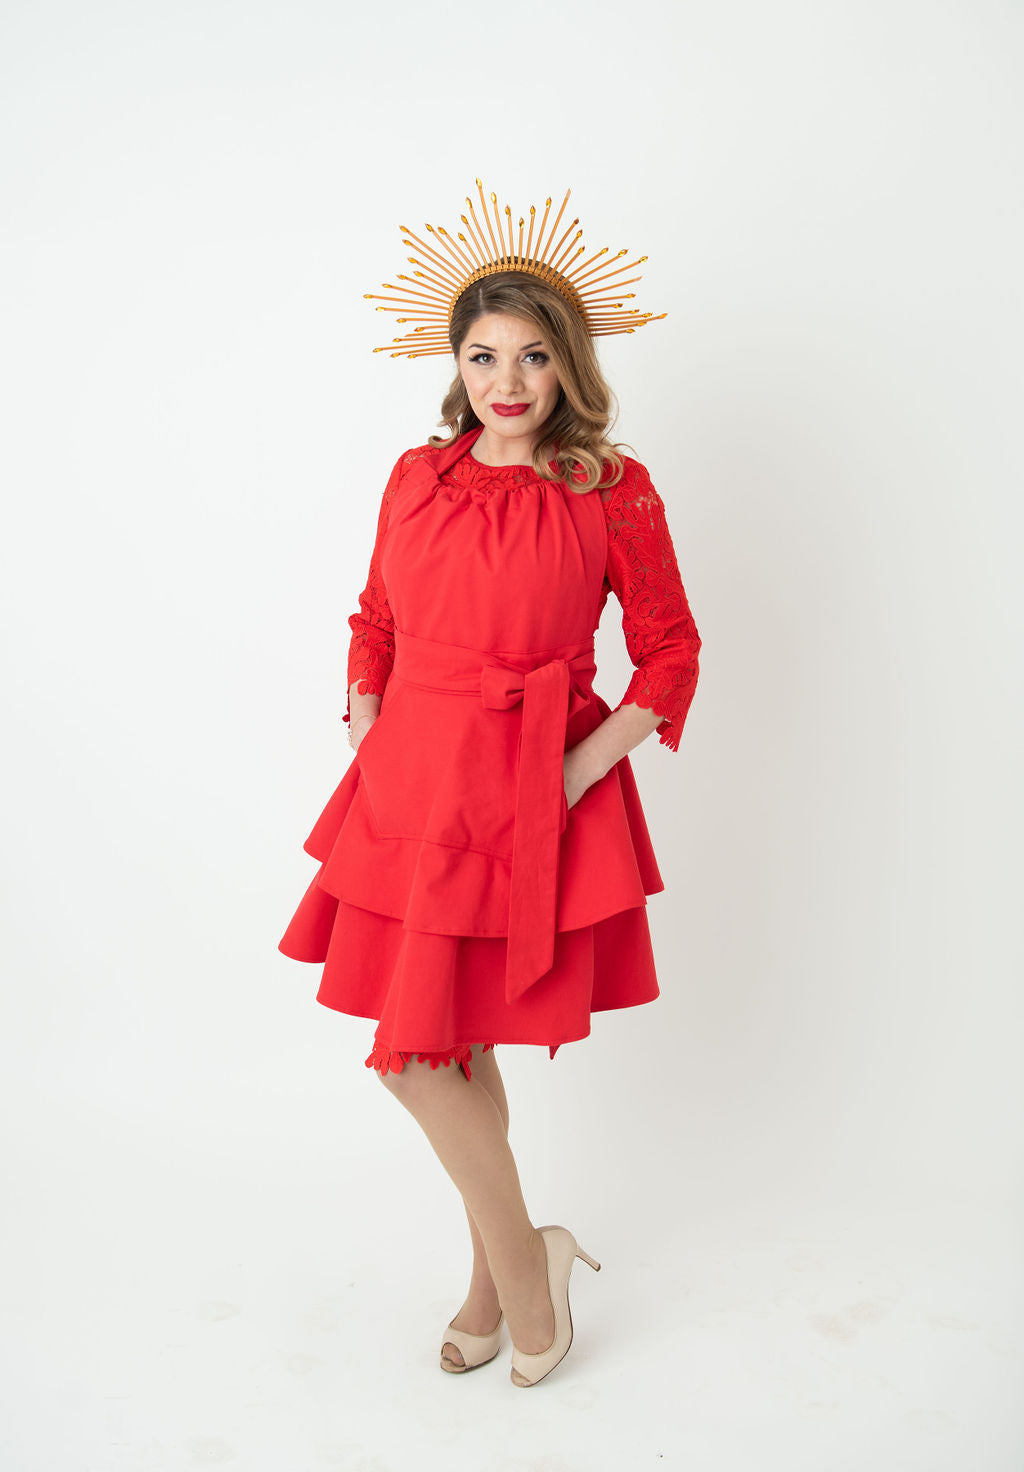 Circular double skirt red apron with pockets for women